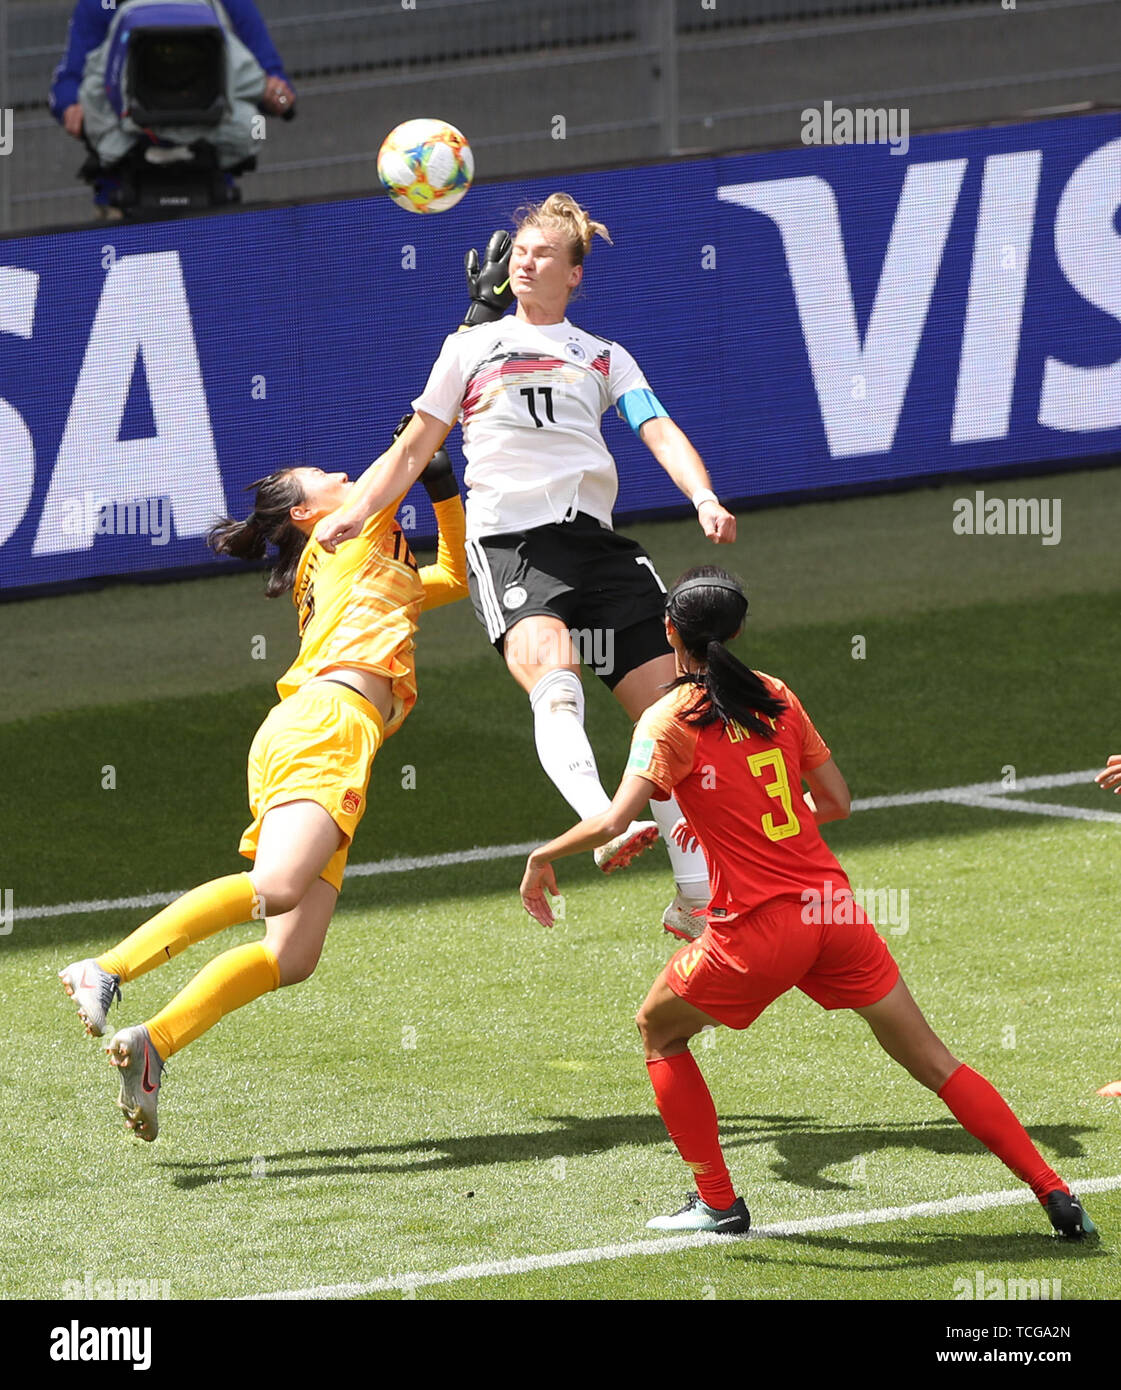 Rennes, France. 8th June, 2019. Alexandra Popp (Top) of Germany competes during the group B match between Germany and China at the 2019 FIFA Women's World Cup in Rennes, France, June 8, 2019. Credit: Xu Zijian/Xinhua/Alamy Live News Stock Photo